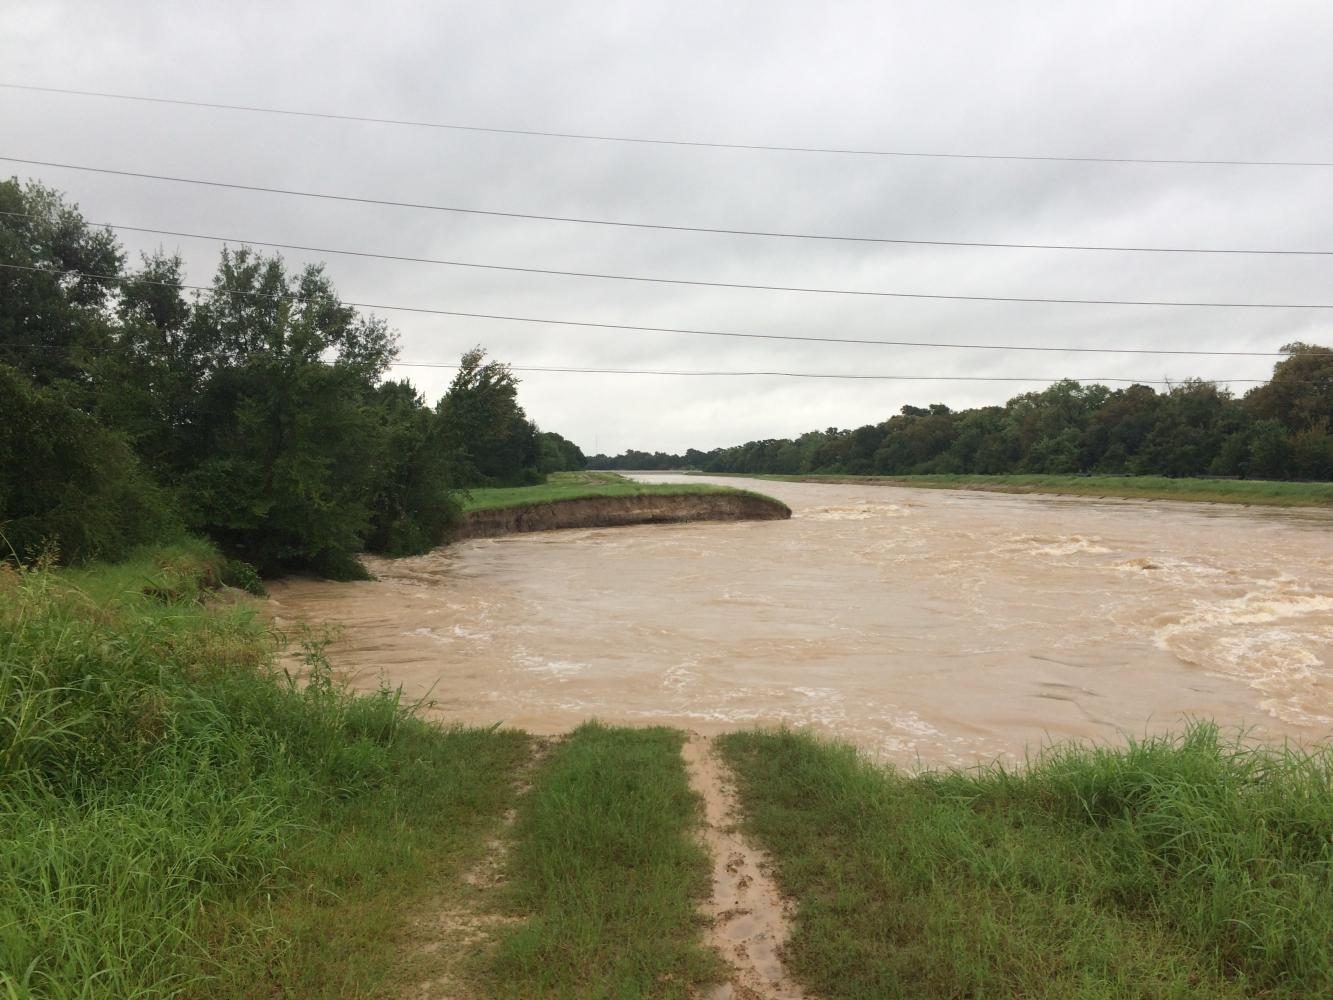 Buffalo Bayou continues to flow rapidly after Harvey seizes a large chunk of the bank. The hurricane damaged a vast amount of land in the Houston area.